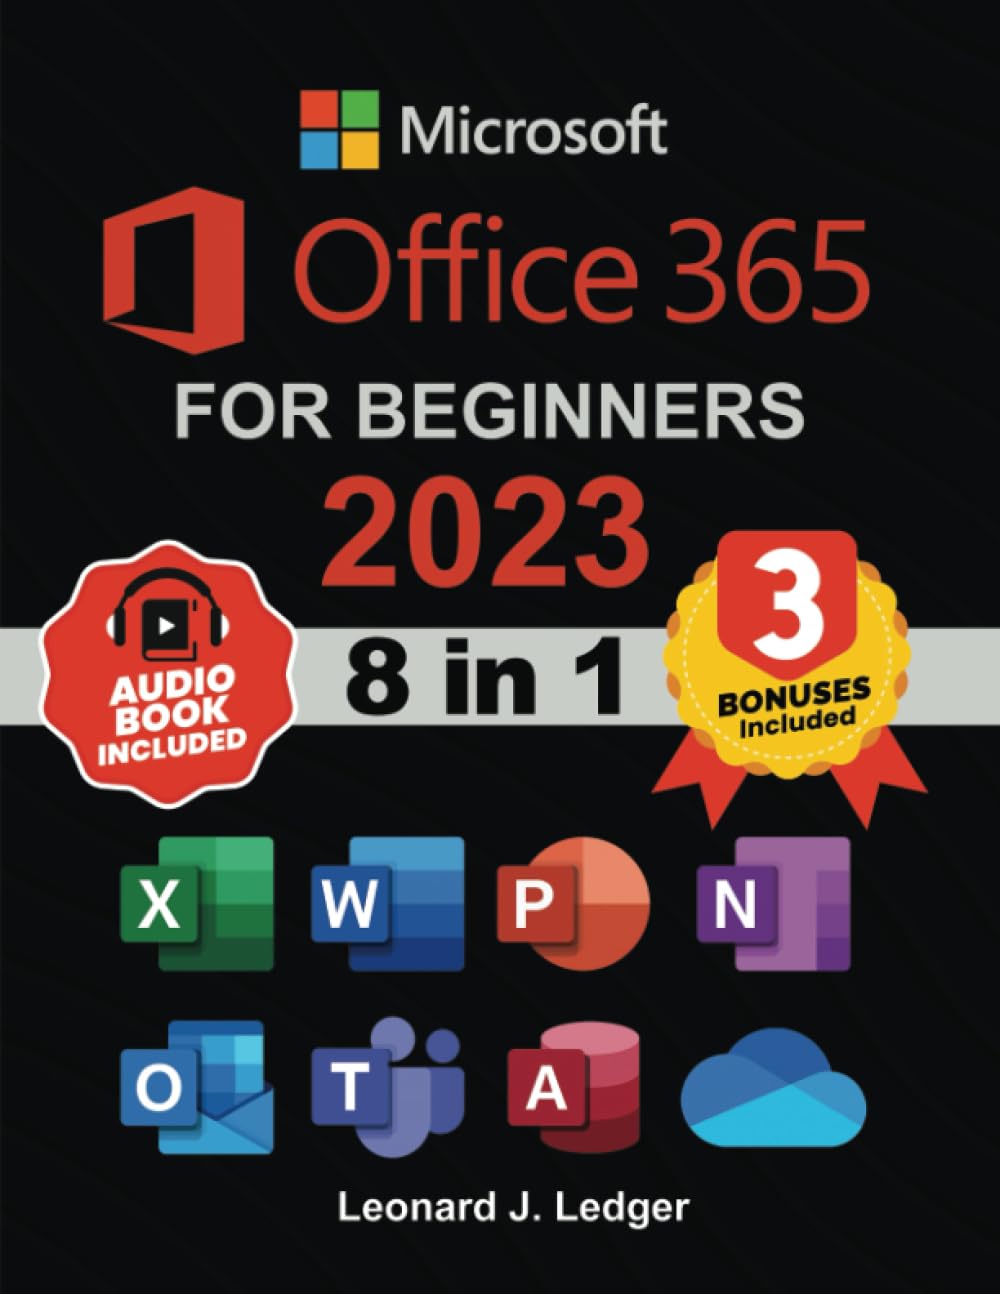 Microsoft Office 365 For Beginners: The 1# Crash Course From Beginners To Advanced. Easy Way to Master The Whole Suite in no Time | Excel, Word, PowerPoint, OneNote, OneDrive, Outlook, Teams & Access